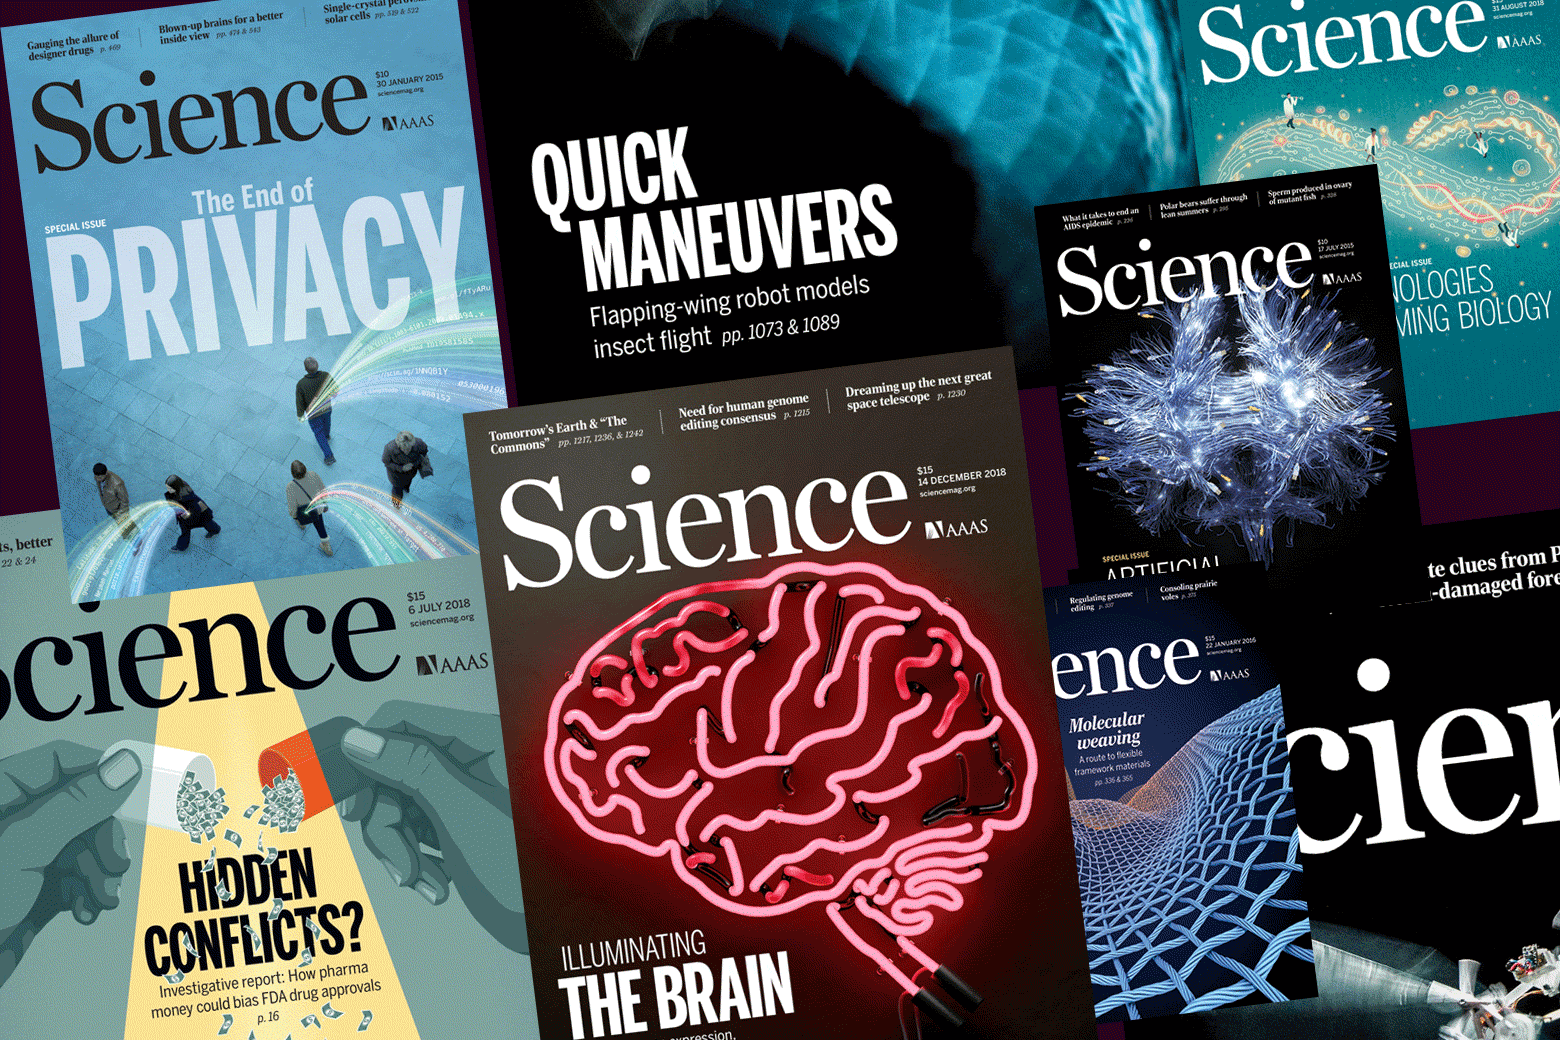 Viewpoint: Promotion of social science drivel by Science magazine ...